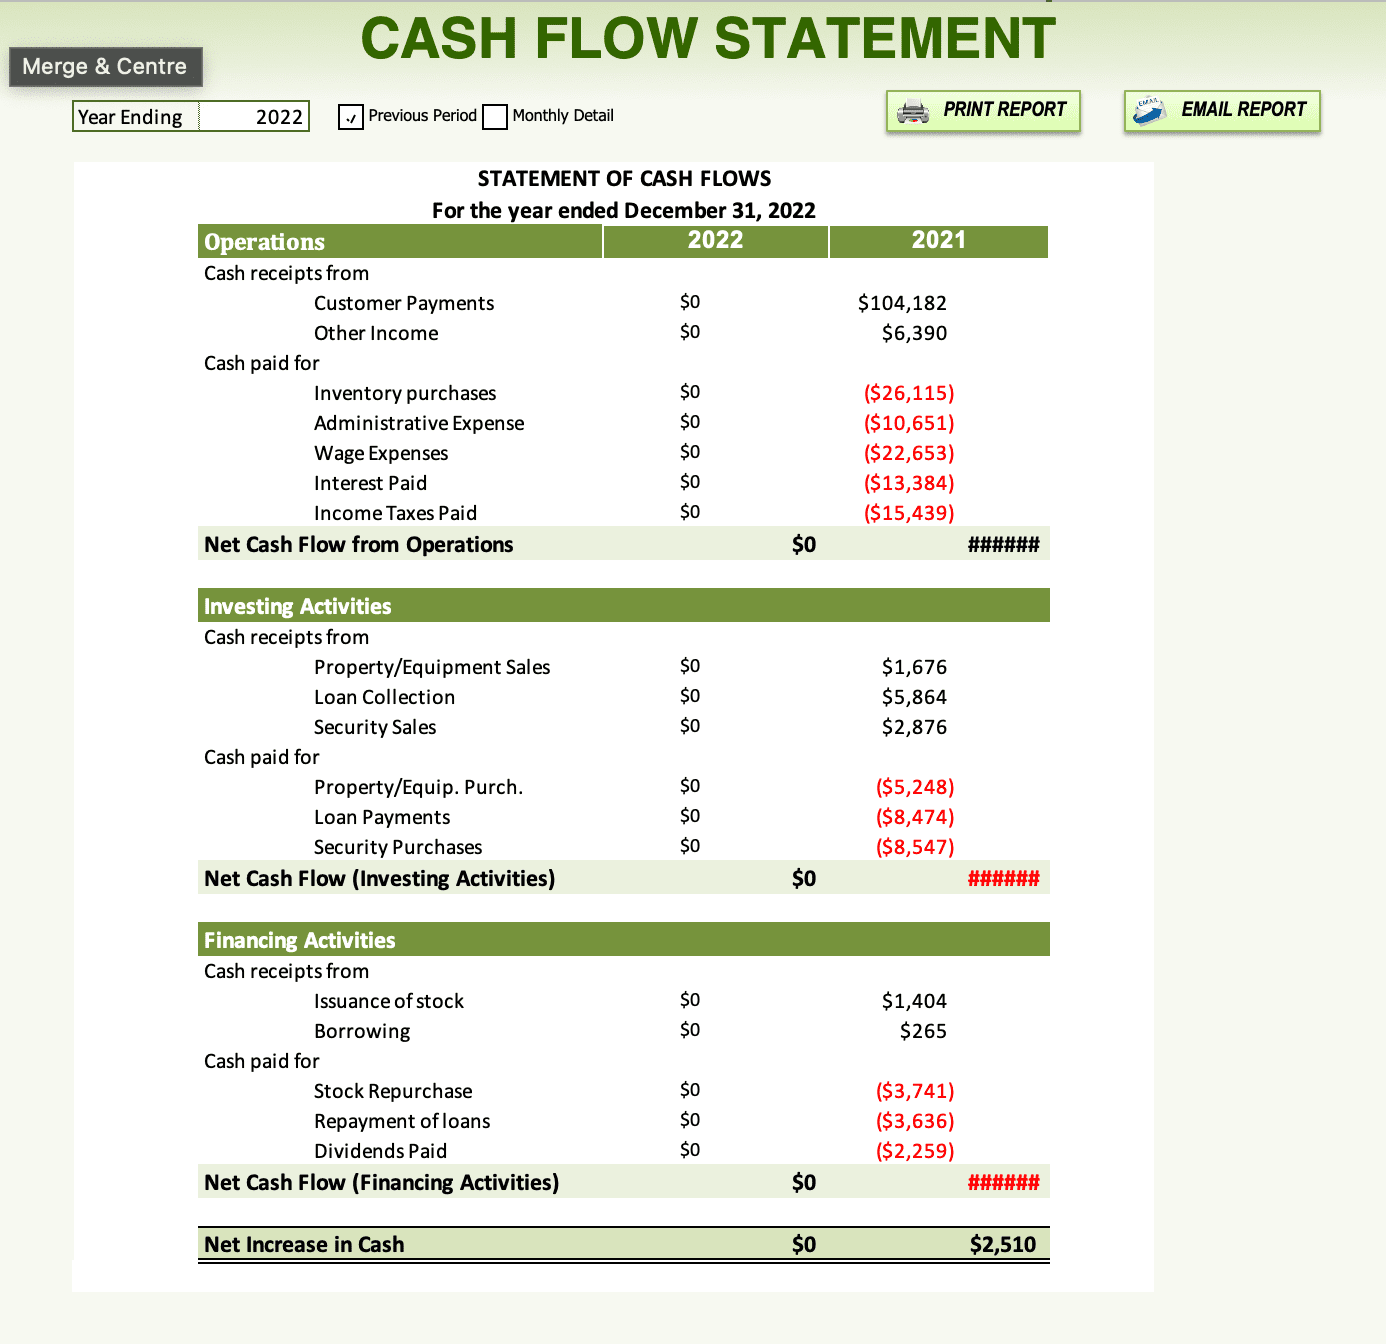 Cash Flow Manager | XLDB Spreadsheet Solutions